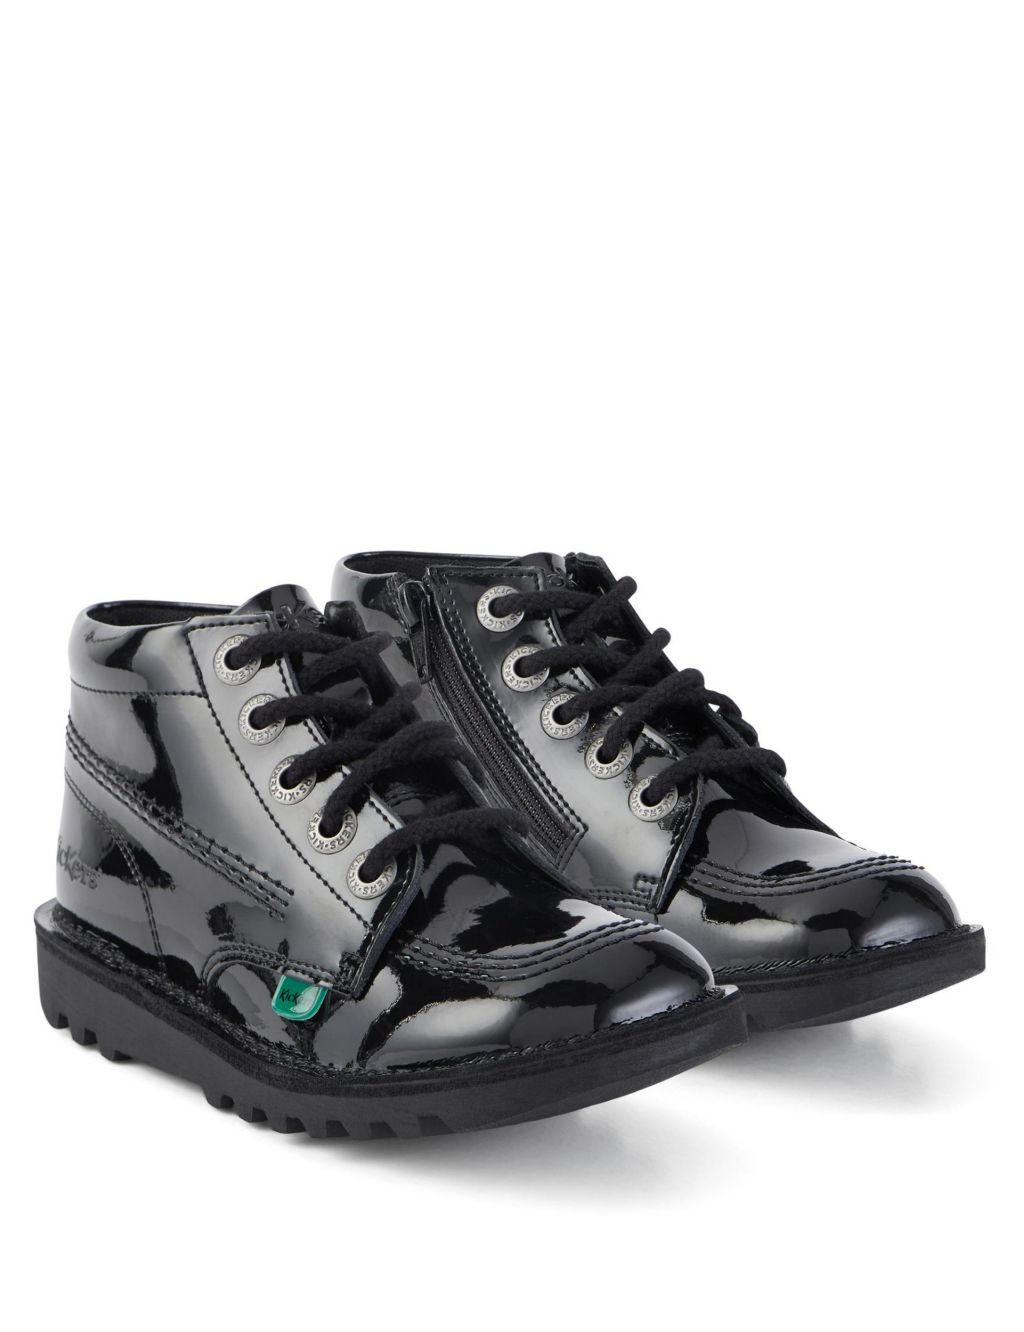 Kids' Patent High Top School Shoes image 2